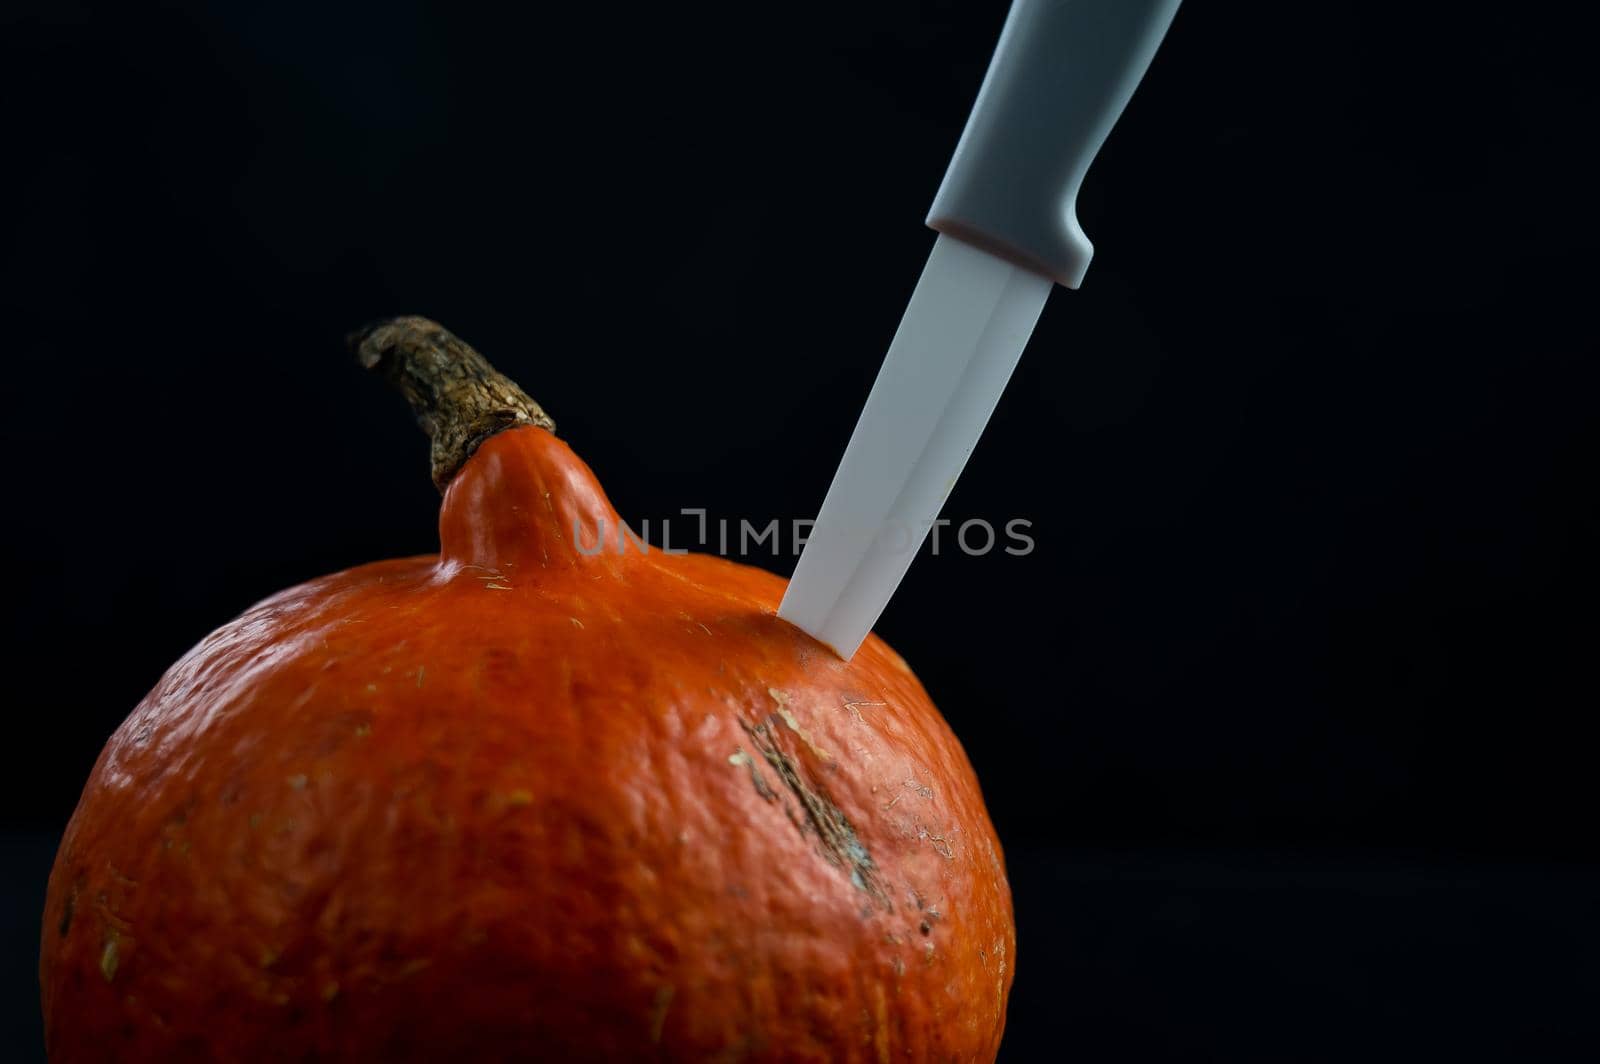 Knife in a pumpkin on a black background. Halloween symbol. Isolate